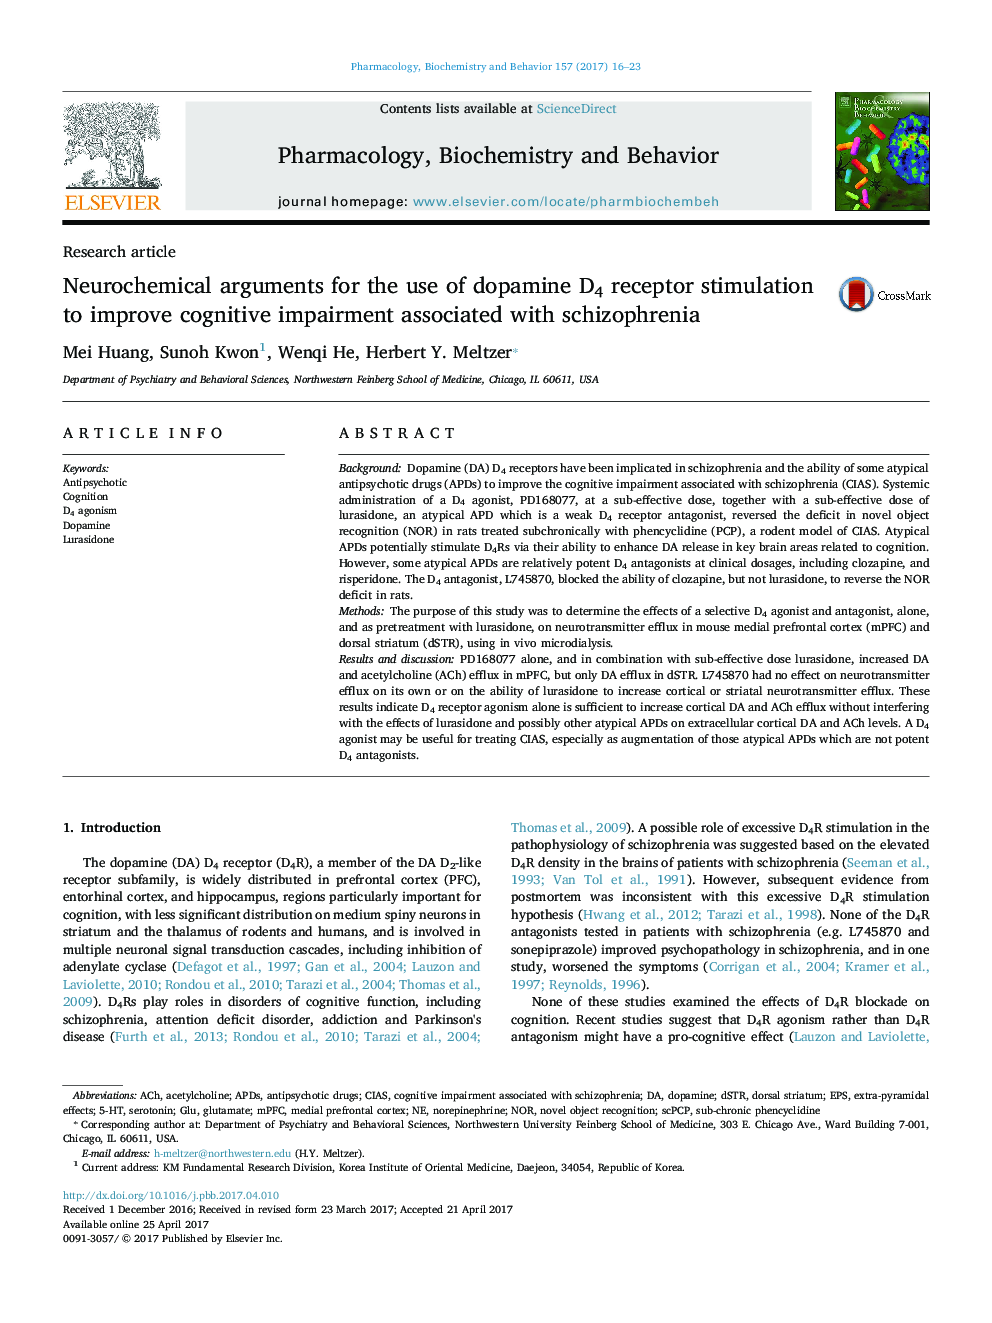 Research articleNeurochemical arguments for the use of dopamine D4 receptor stimulation to improve cognitive impairment associated with schizophrenia